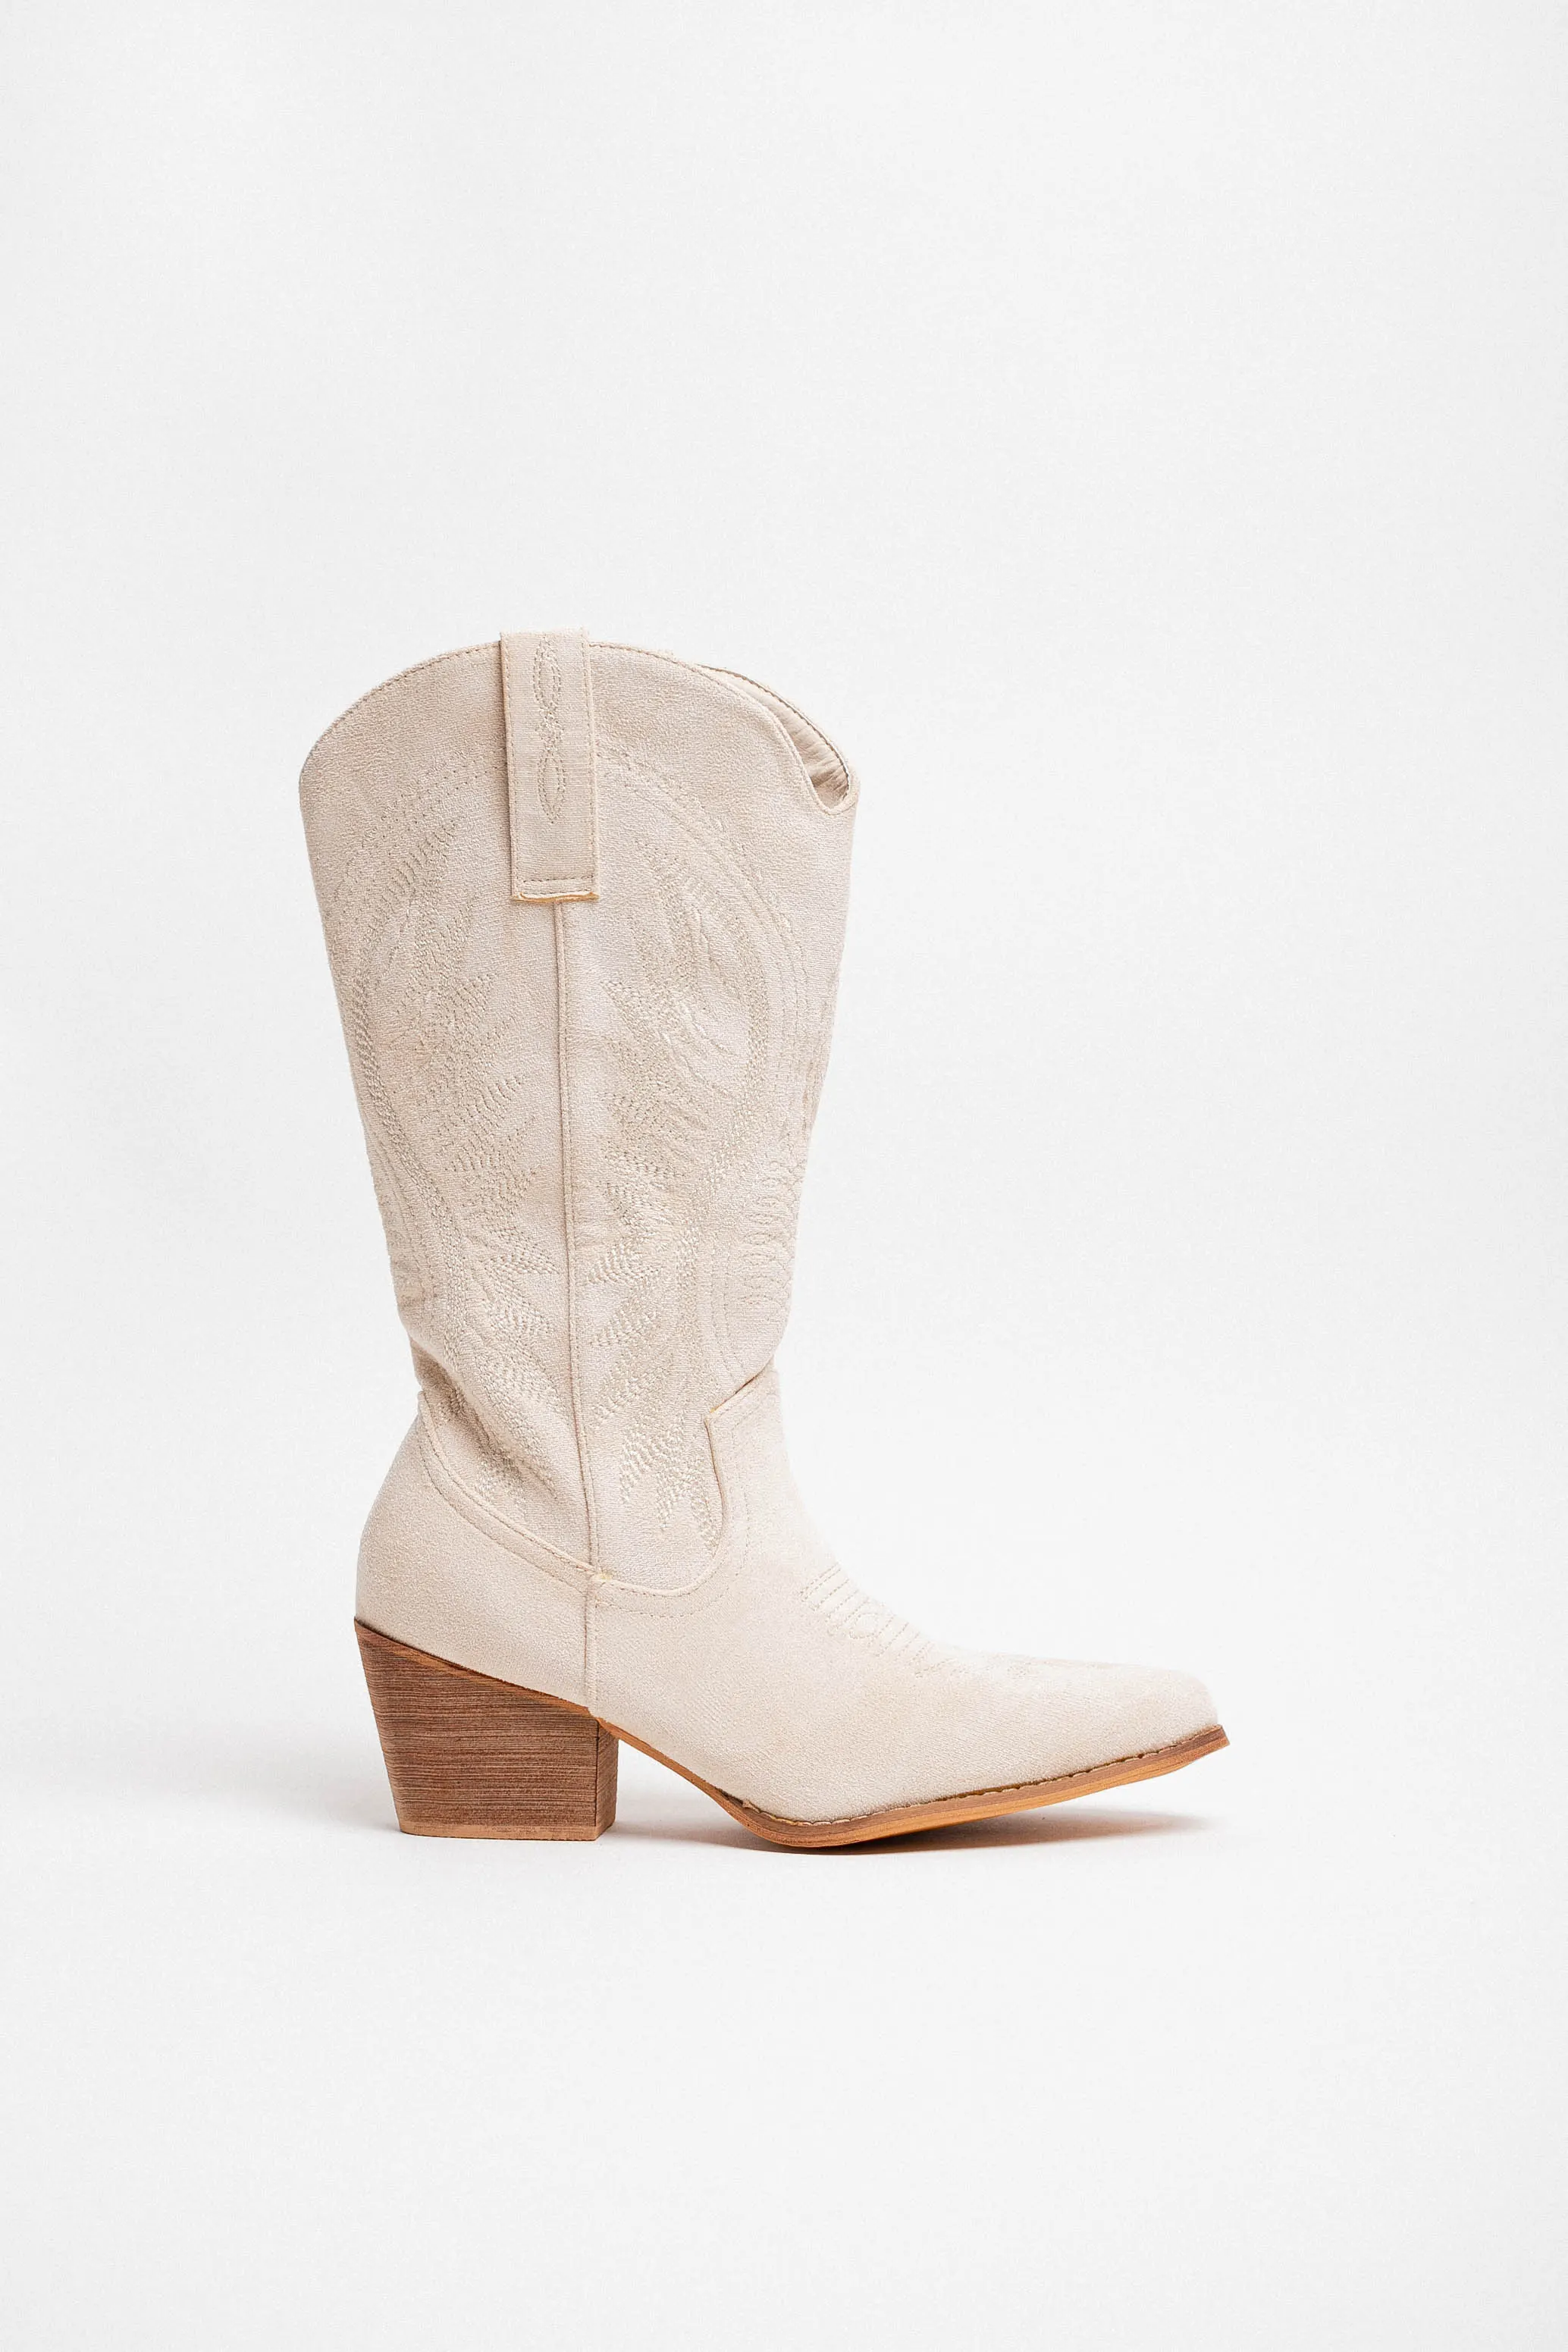 PUBERE BOOT - BEIGE